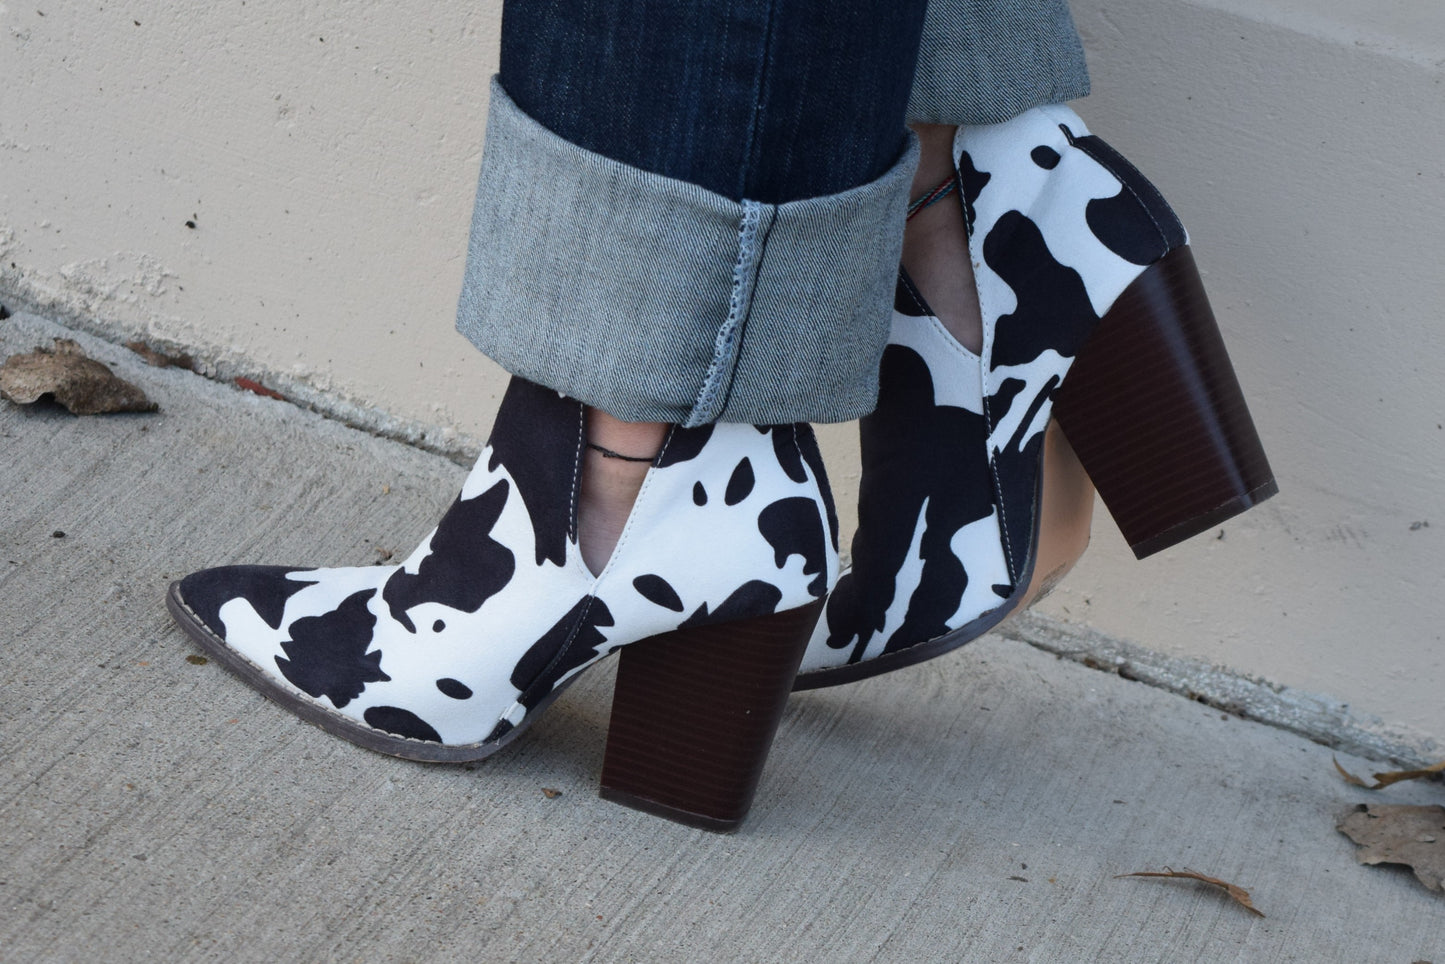 The Calloway Cowprint Booties